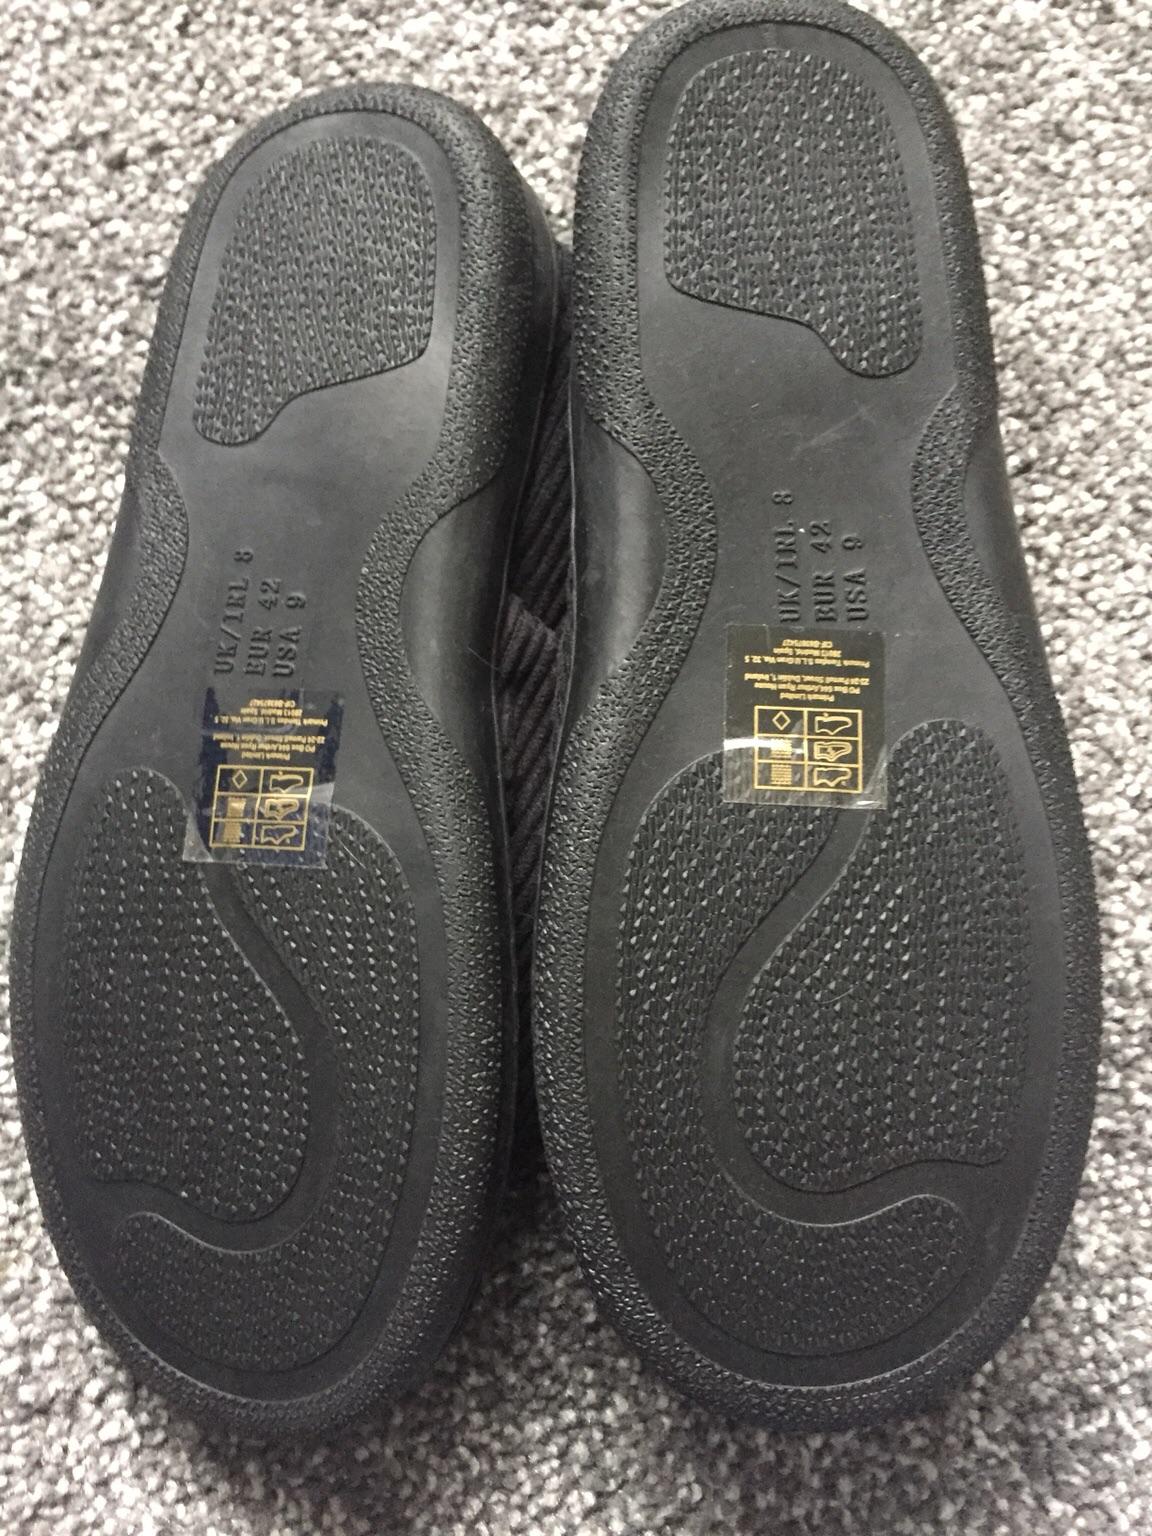 Men's slippers size 6 in S5 Sheffield for £1.00 for sale | Shpock